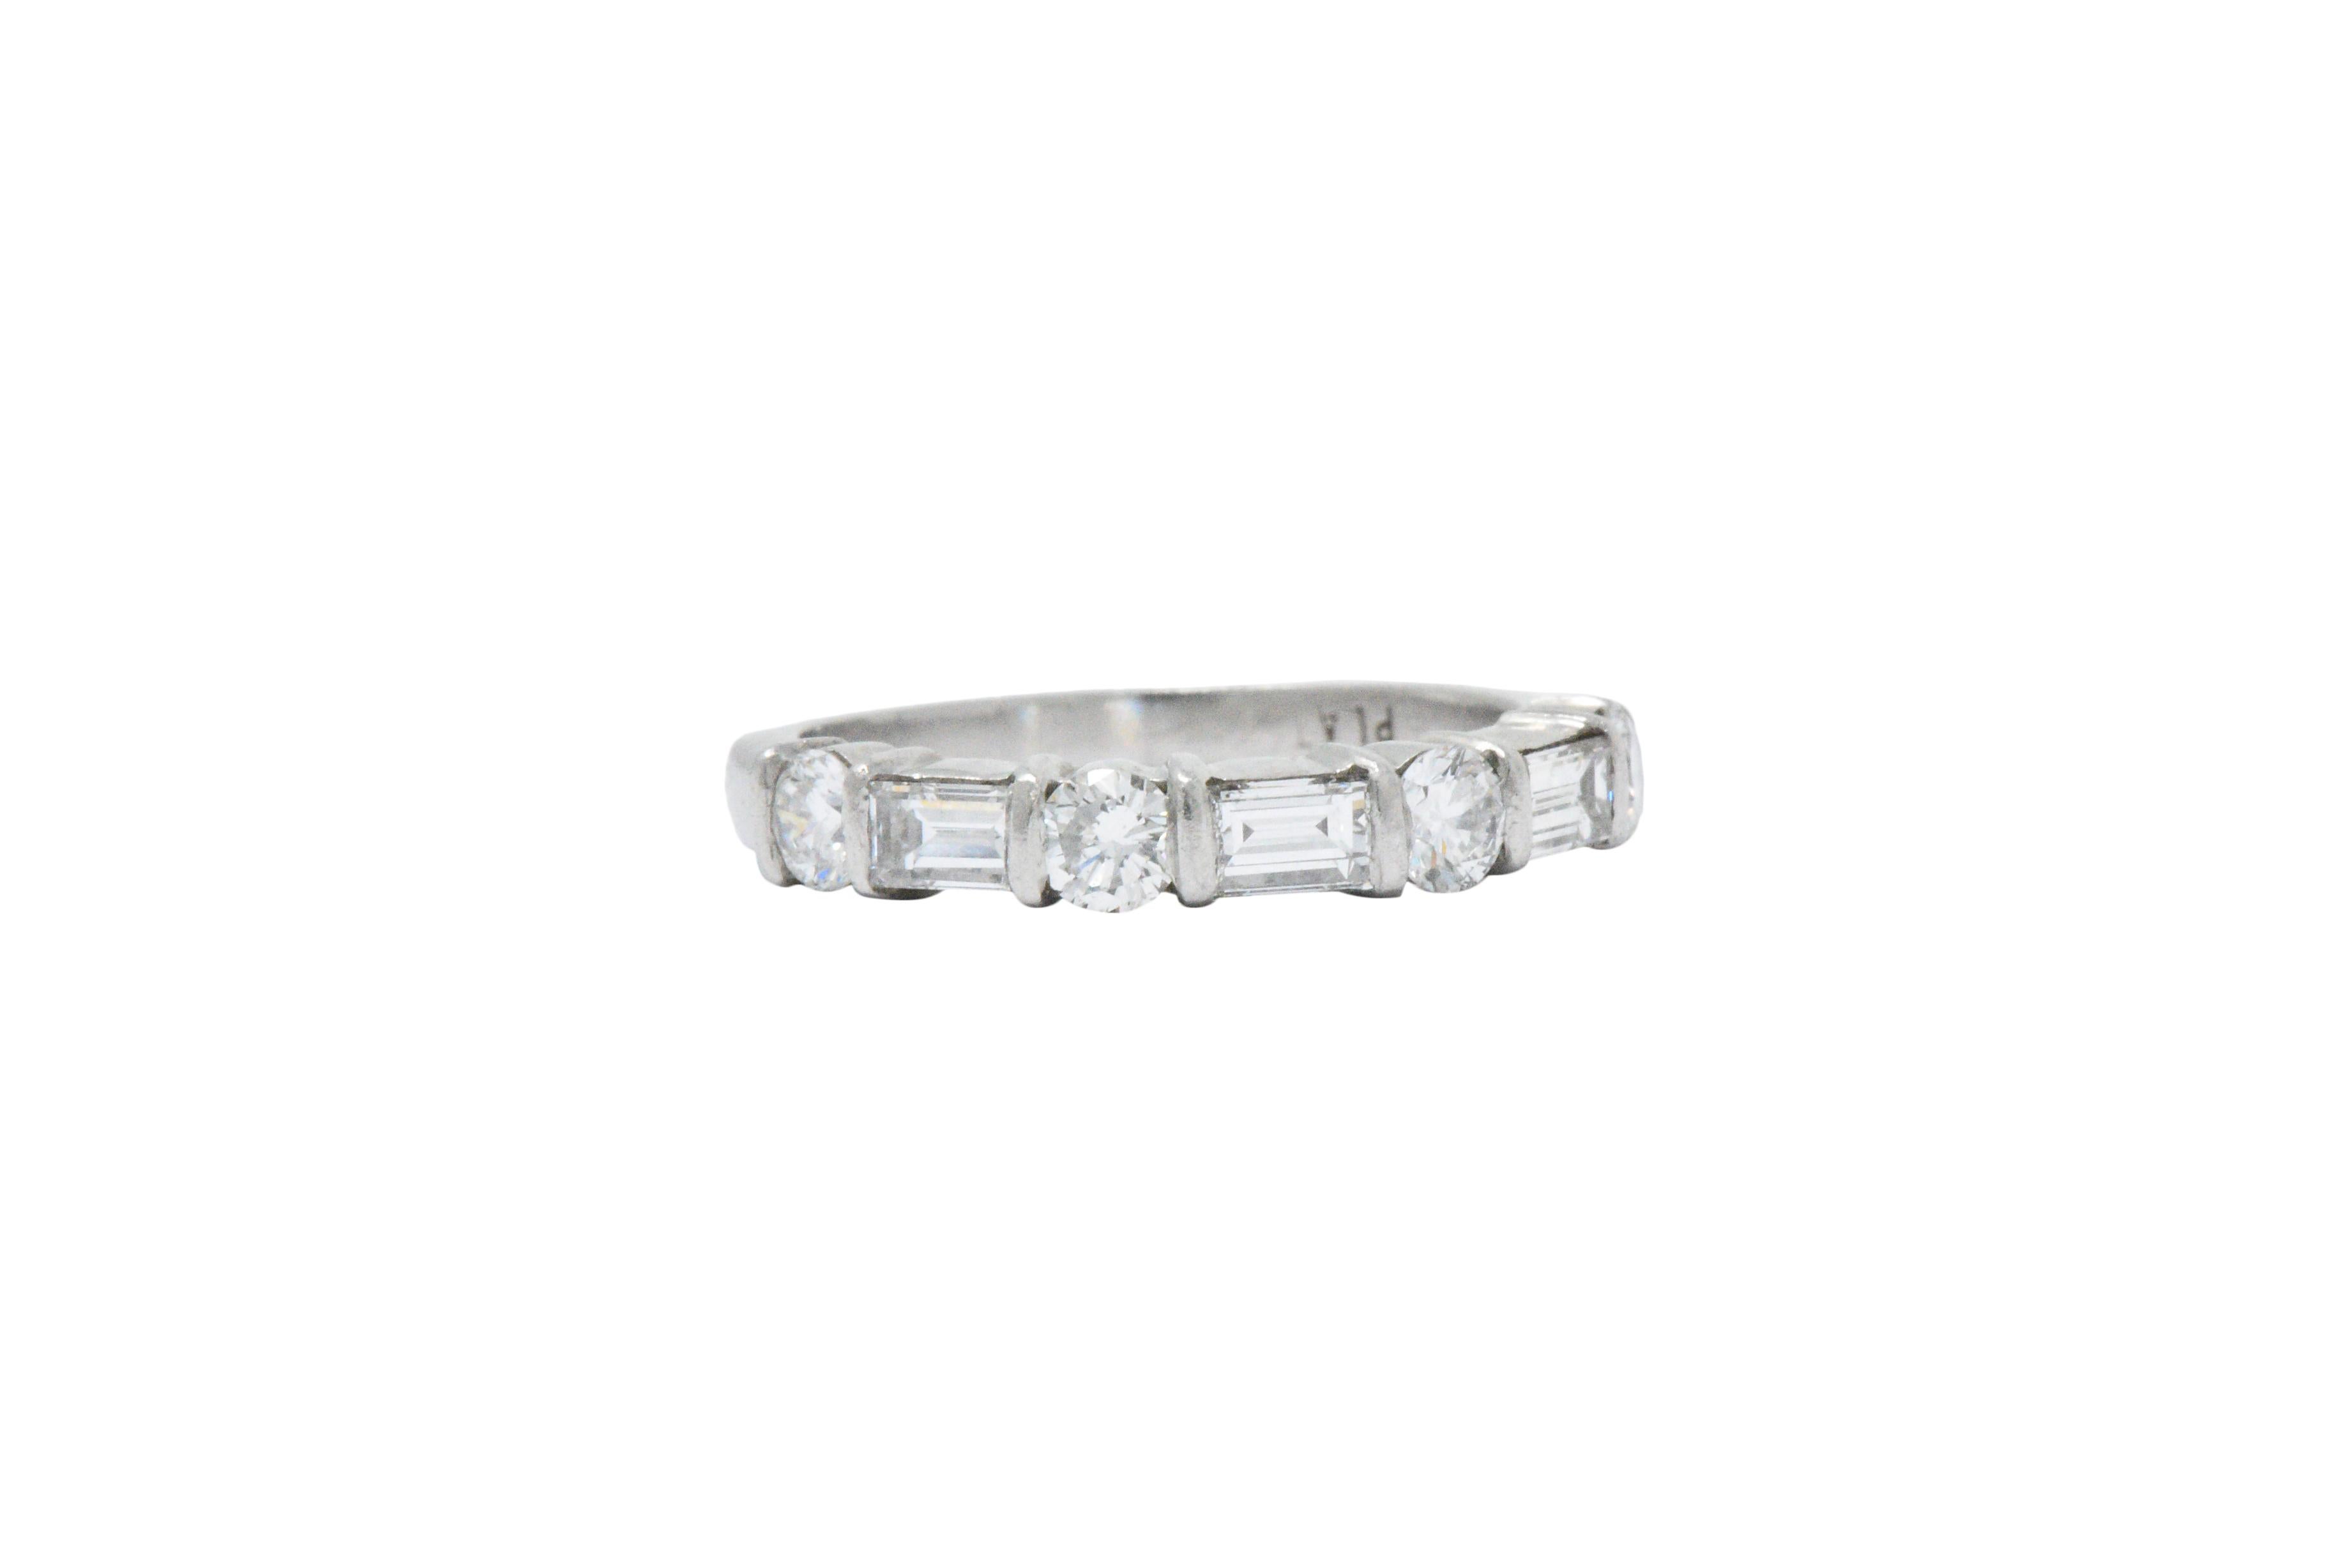 Contemporary 1.14 Carat Diamond and Platinum Eternity Band Stackable Ring